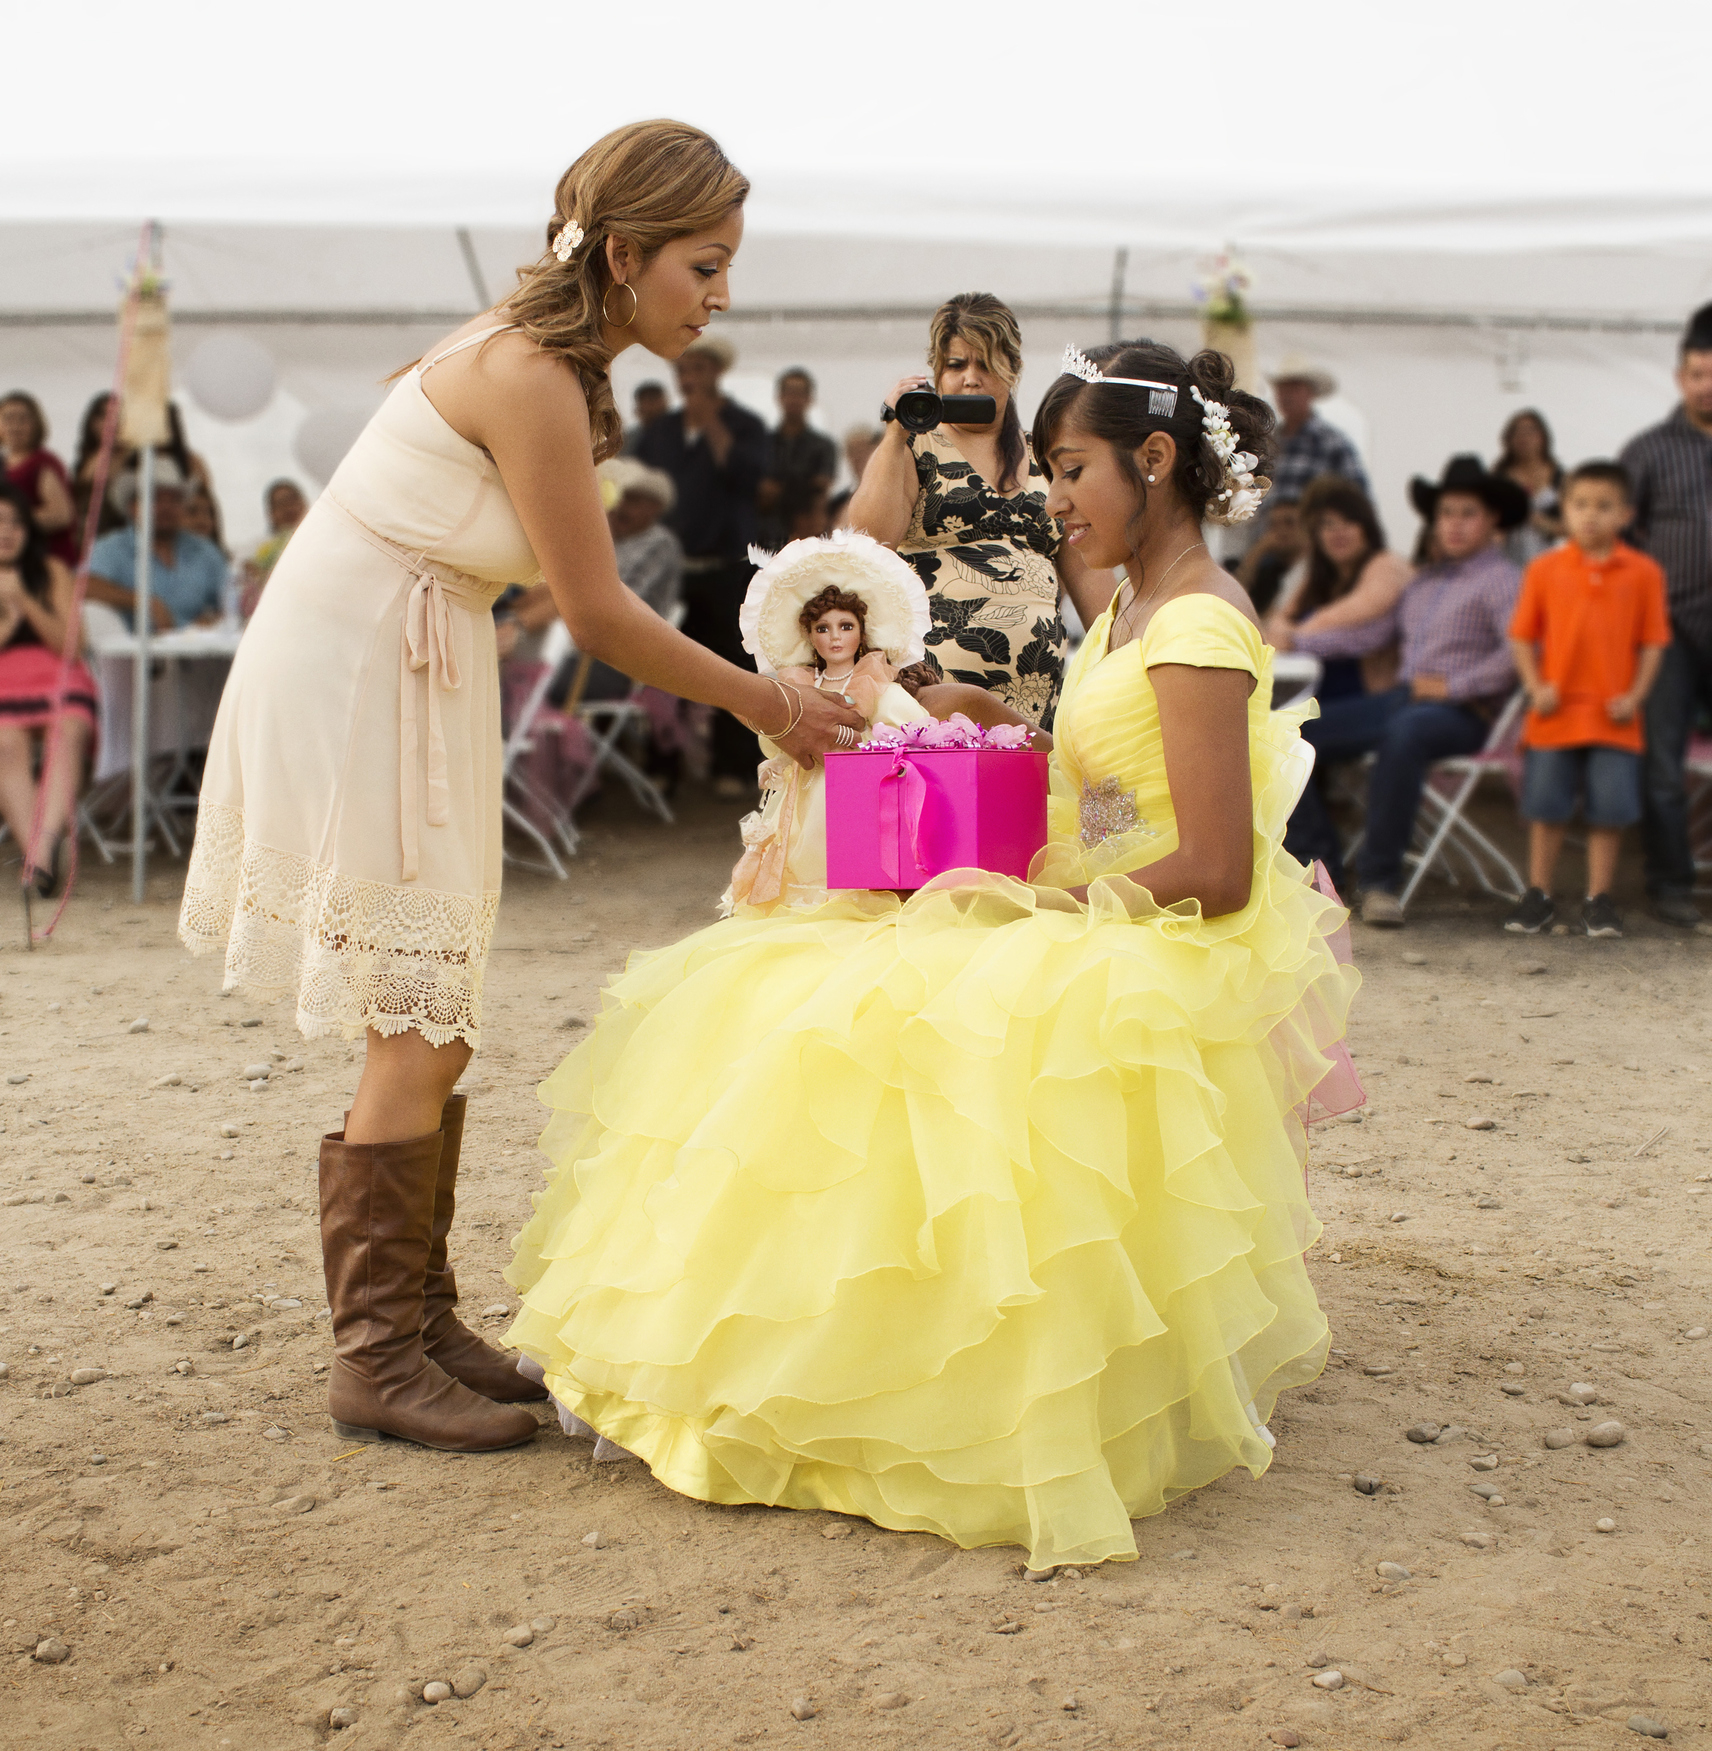 A mother handing her 15-year-old daughter presents on her quinceañera